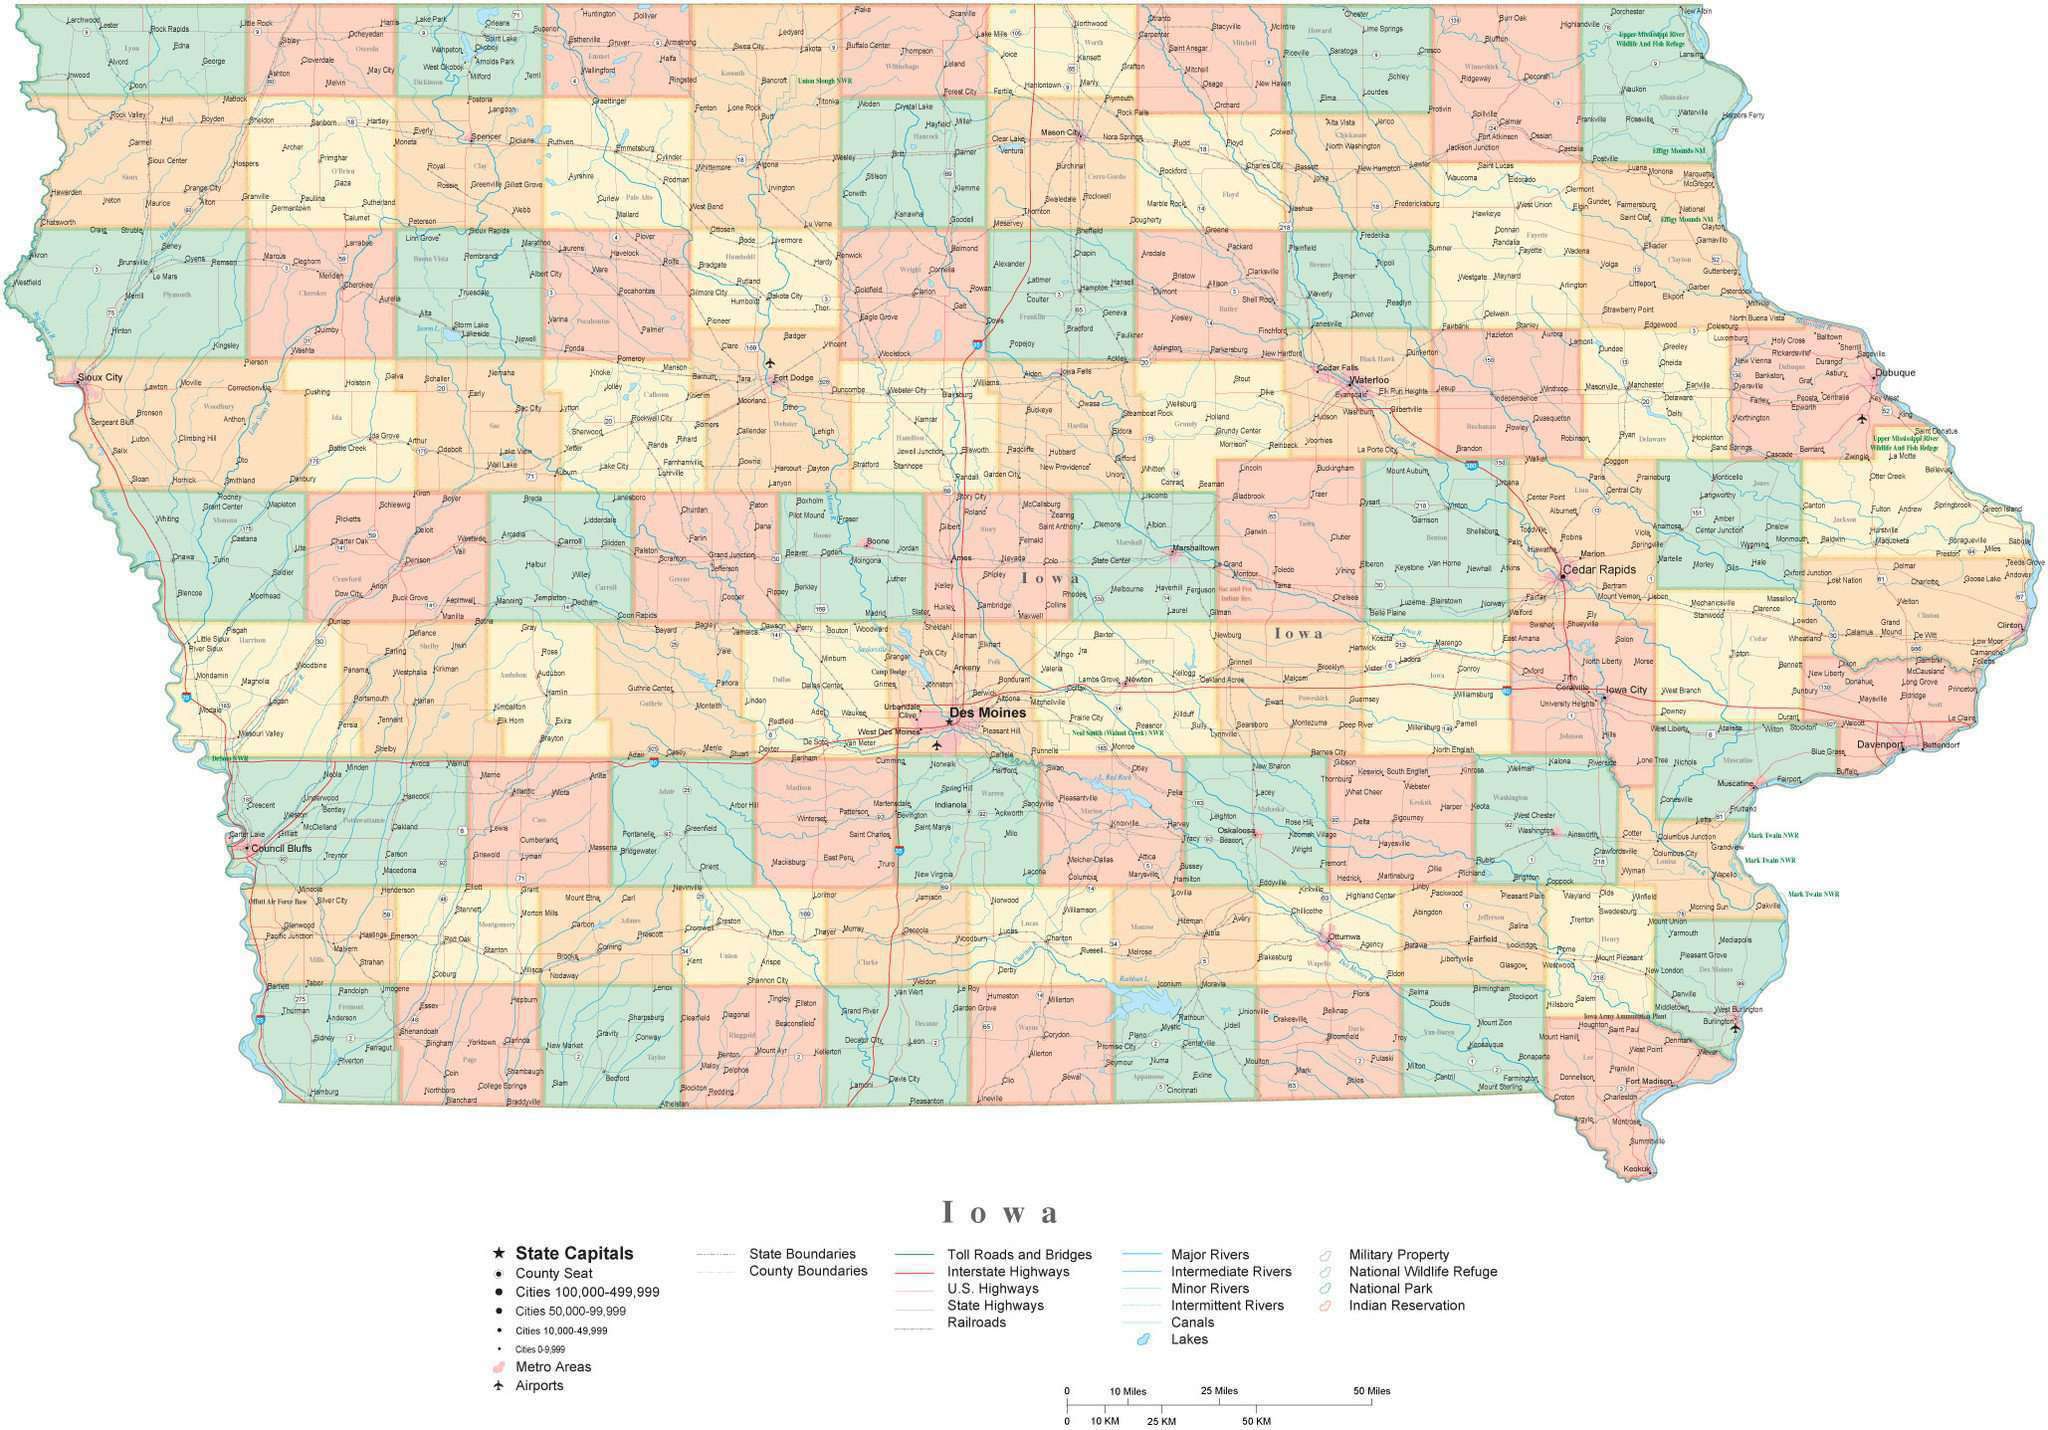 State Map of Iowa in Adobe Illustrator vector format. Detailed